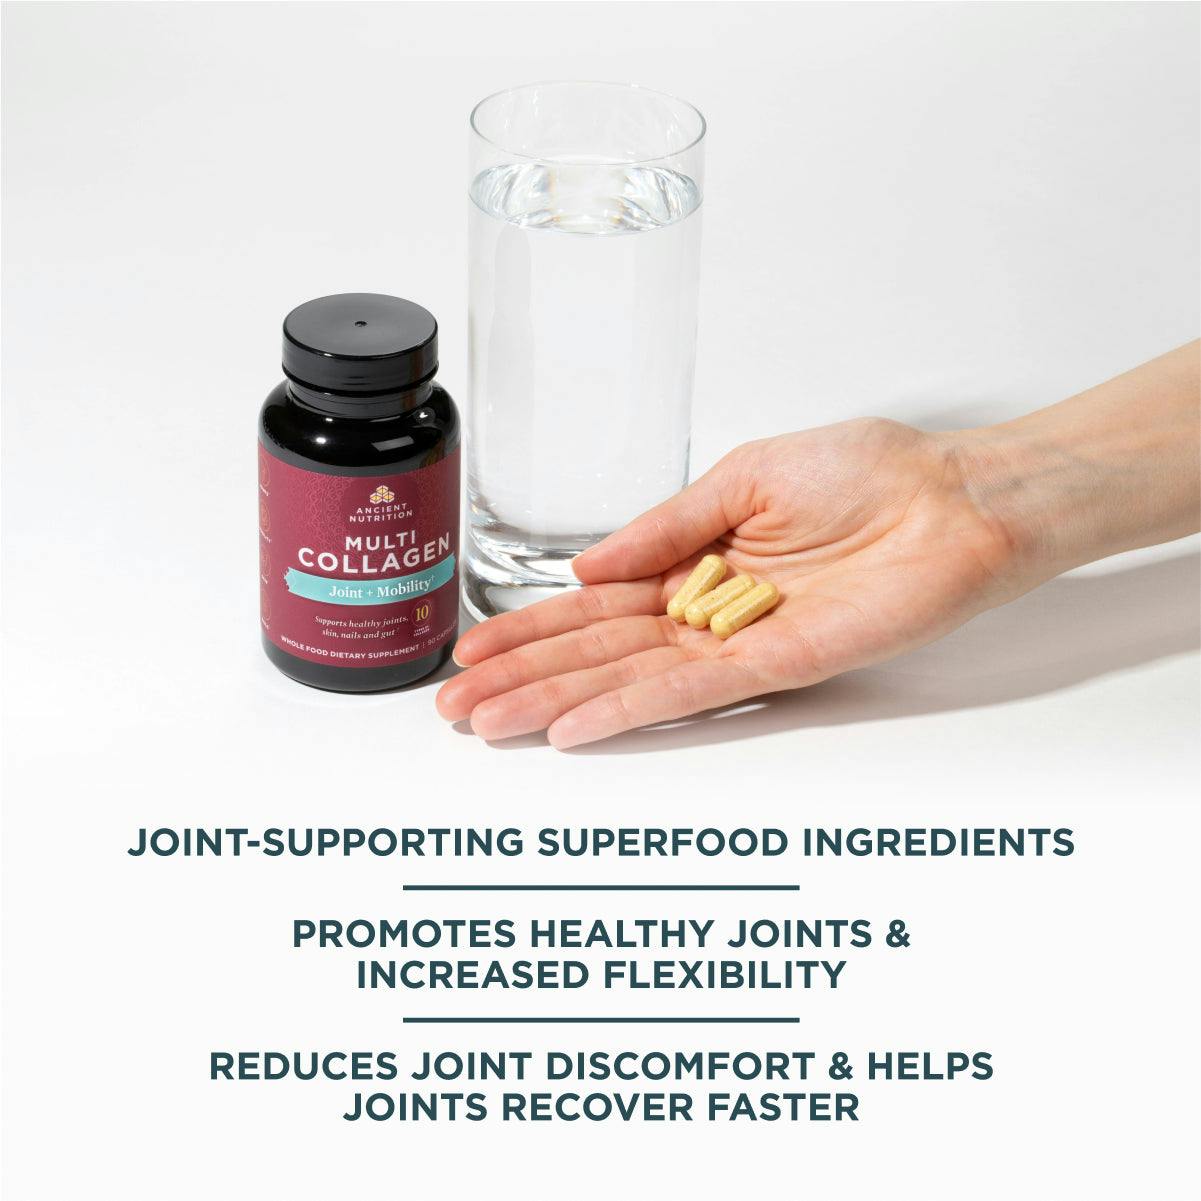 person holding multi collagen capsules joint + mobility